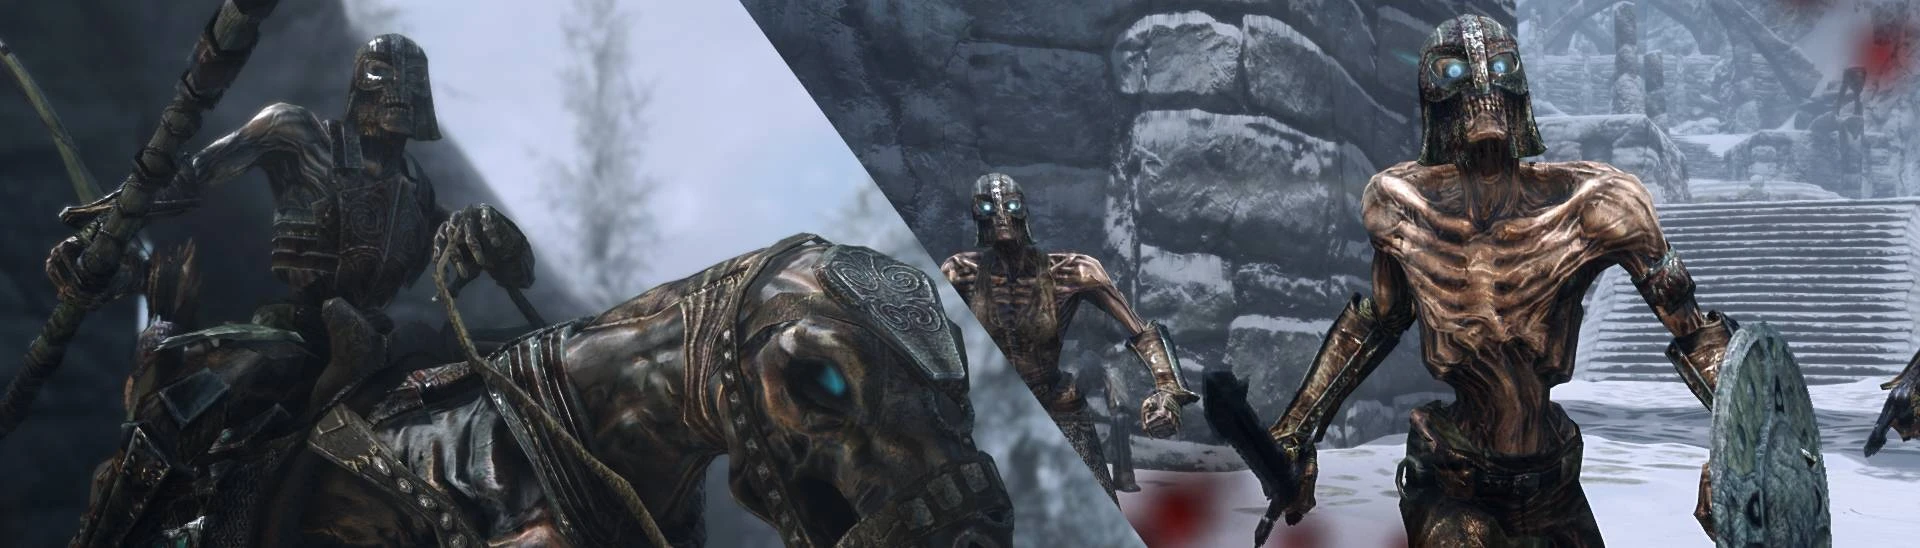 Some animals did t-pose - Technical Support - Skyrim: Special Edition -  LoversLab